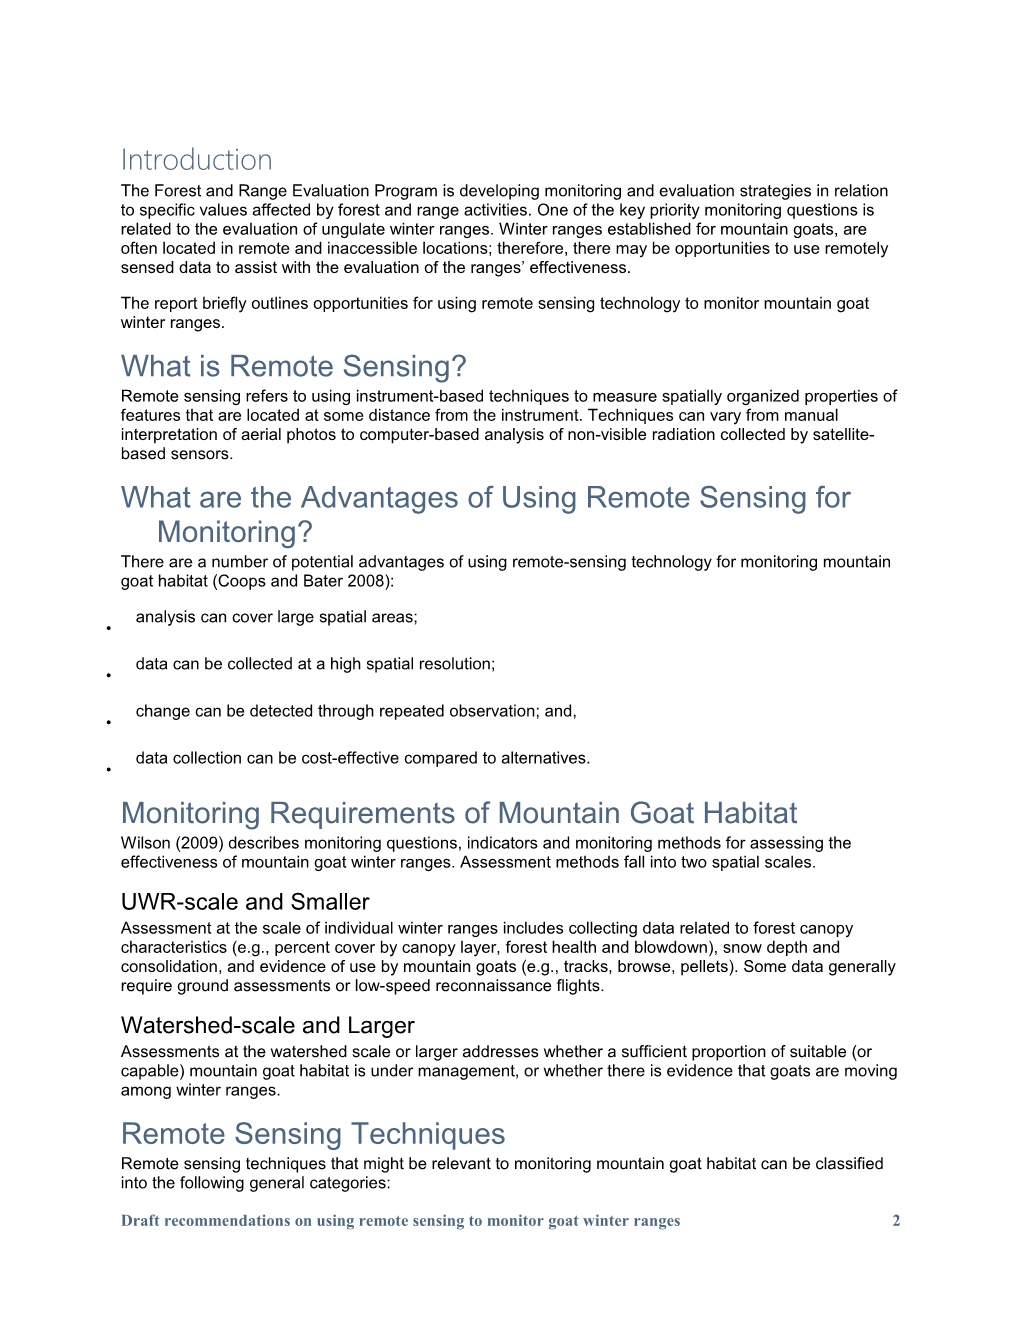 Recommendations on Using Remote Sensing to Monitor Mountain Goat Habitat